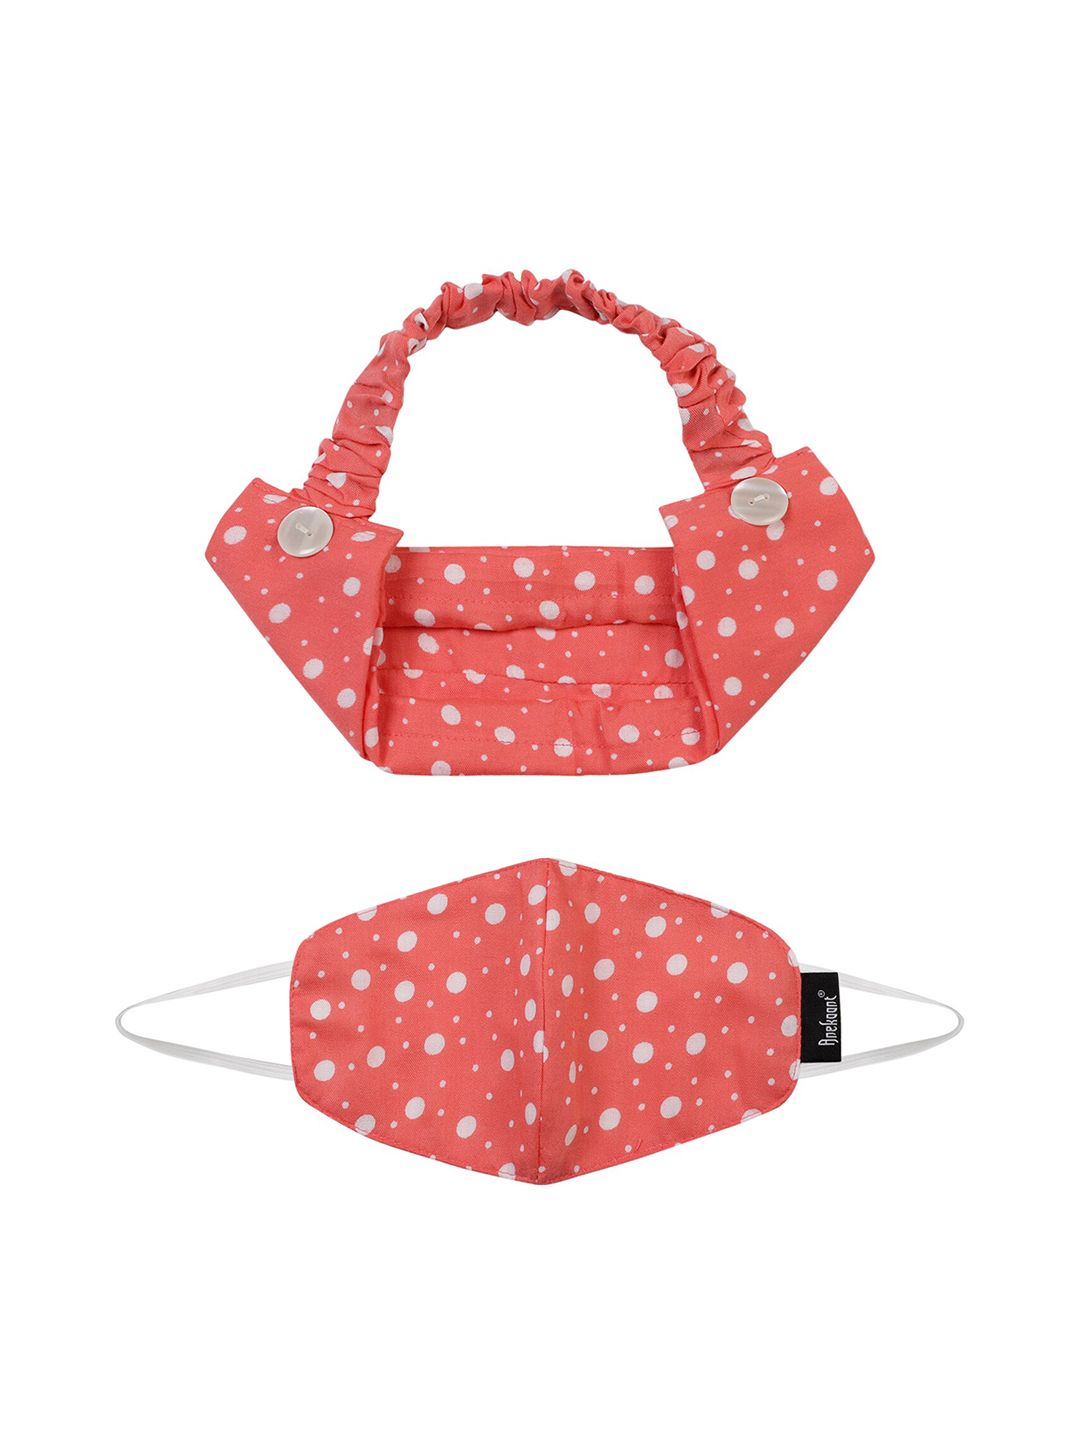 Anekaant Women Pink & White 3-Ply Pastel Polka Dot Fabric Mask with Hairband Price in India